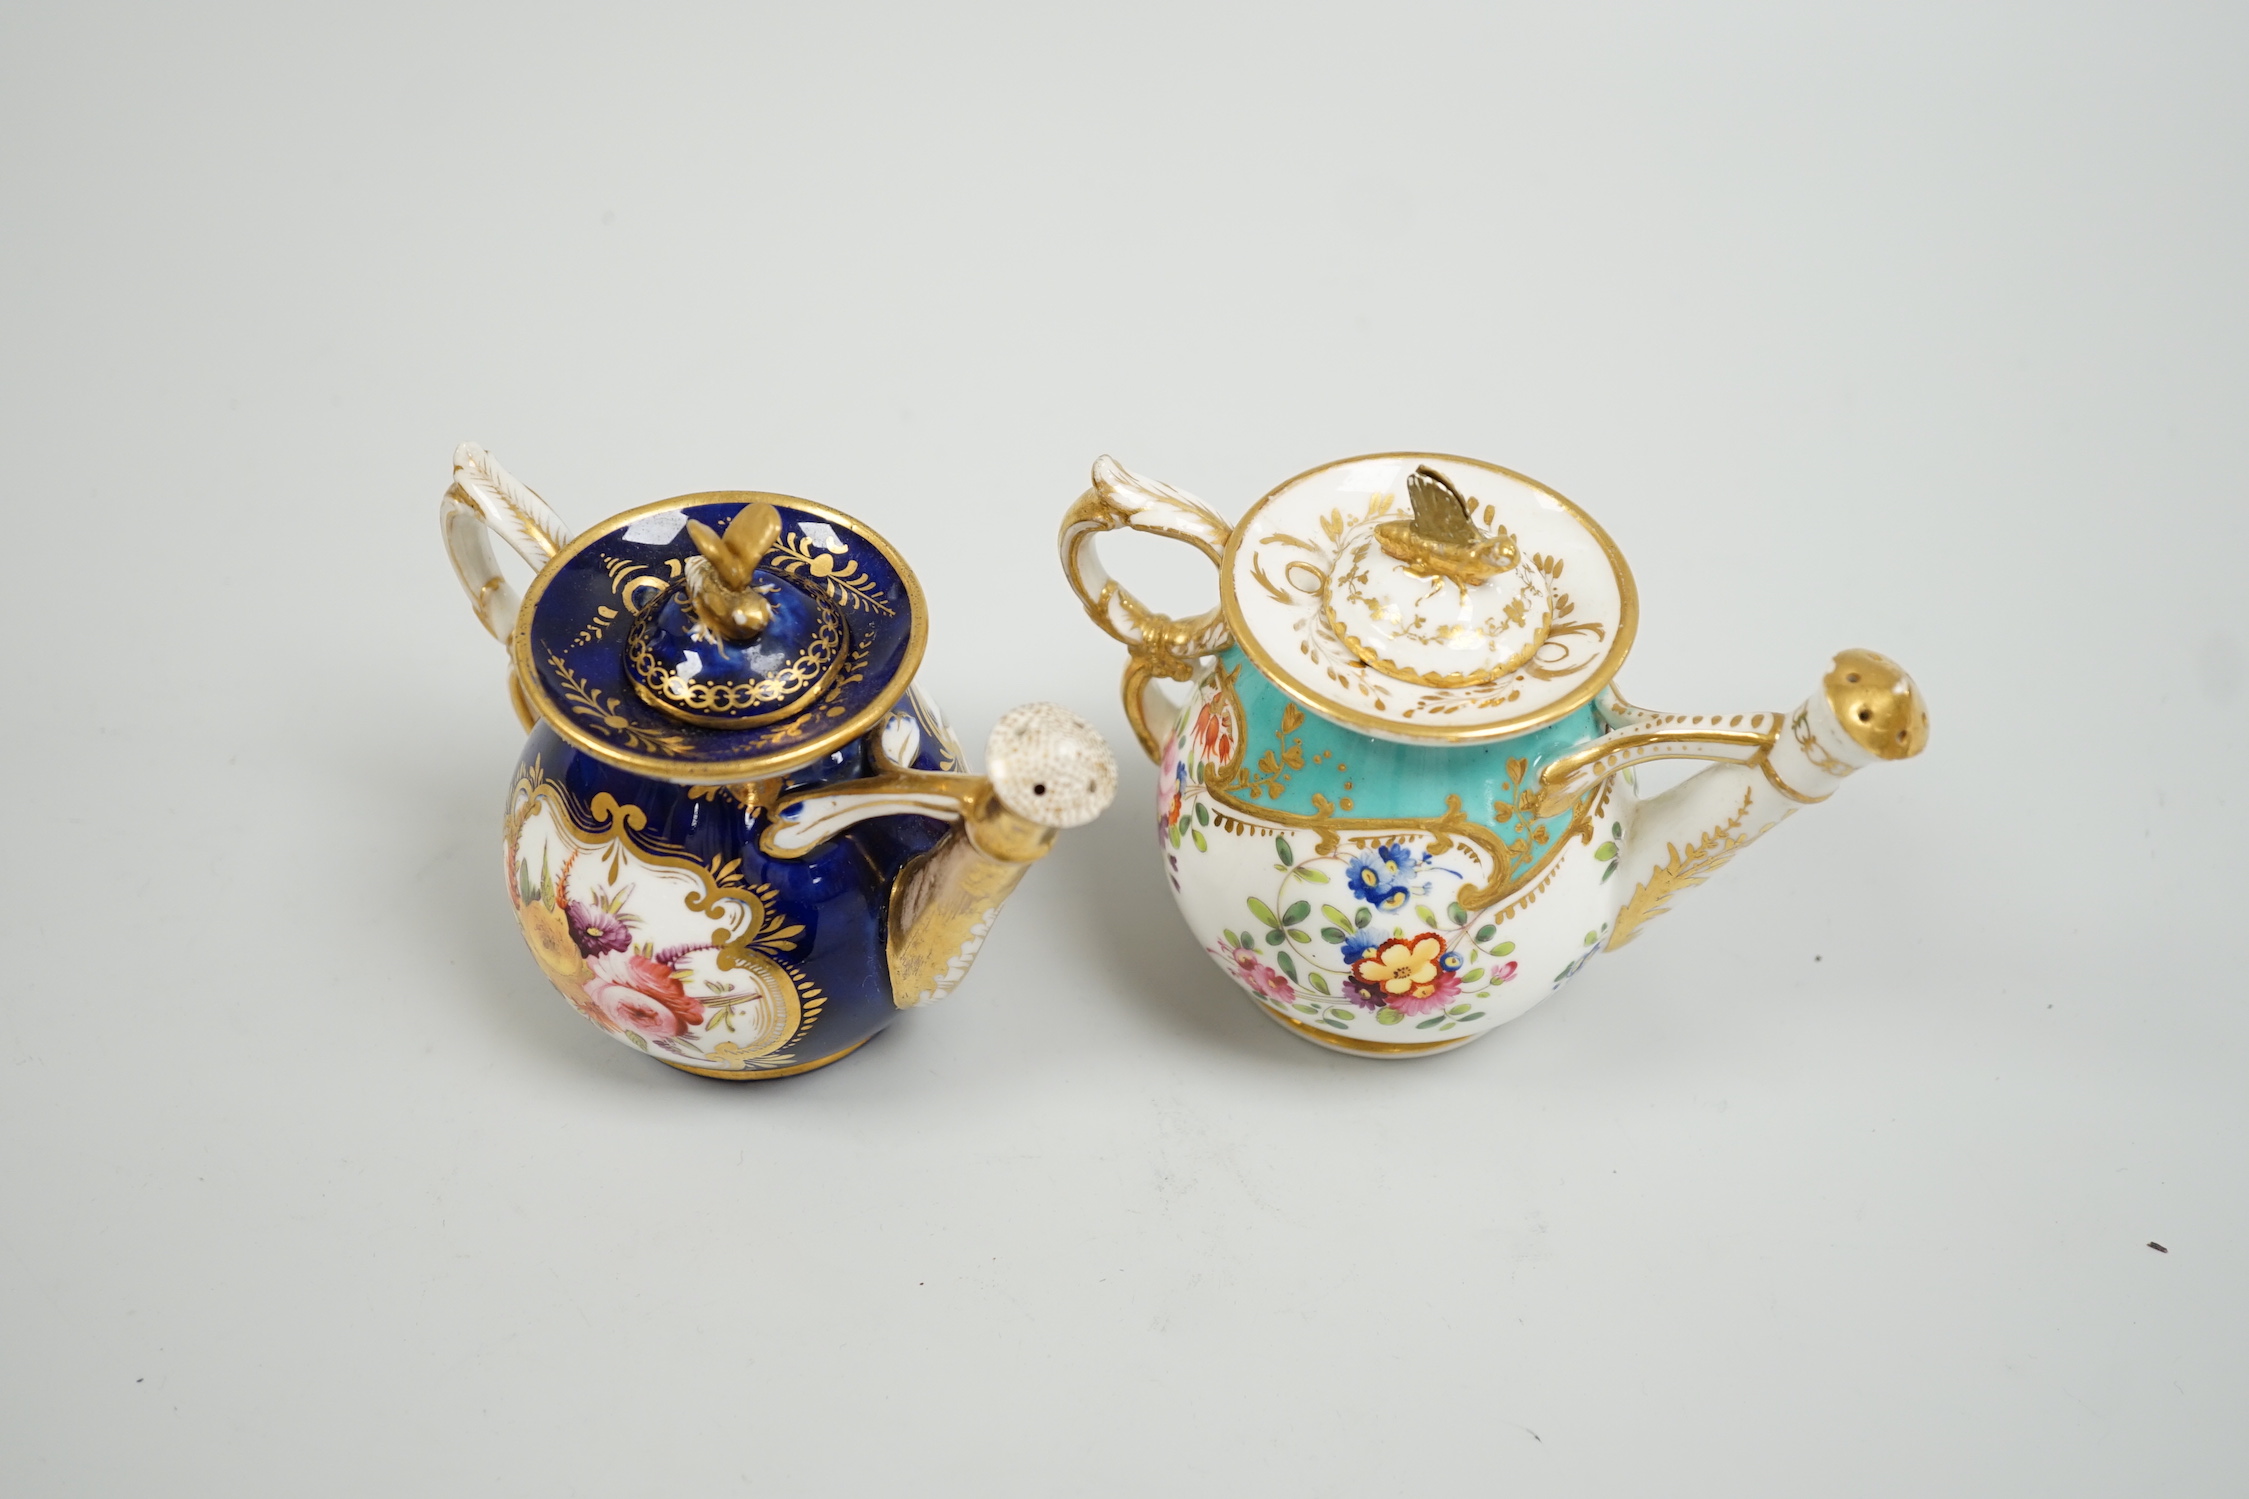 Toy porcelain. Two English rosewater sprinklers, c.1820, possibly Coalport, each modelled in the form of a watering can, tallest 9cm high